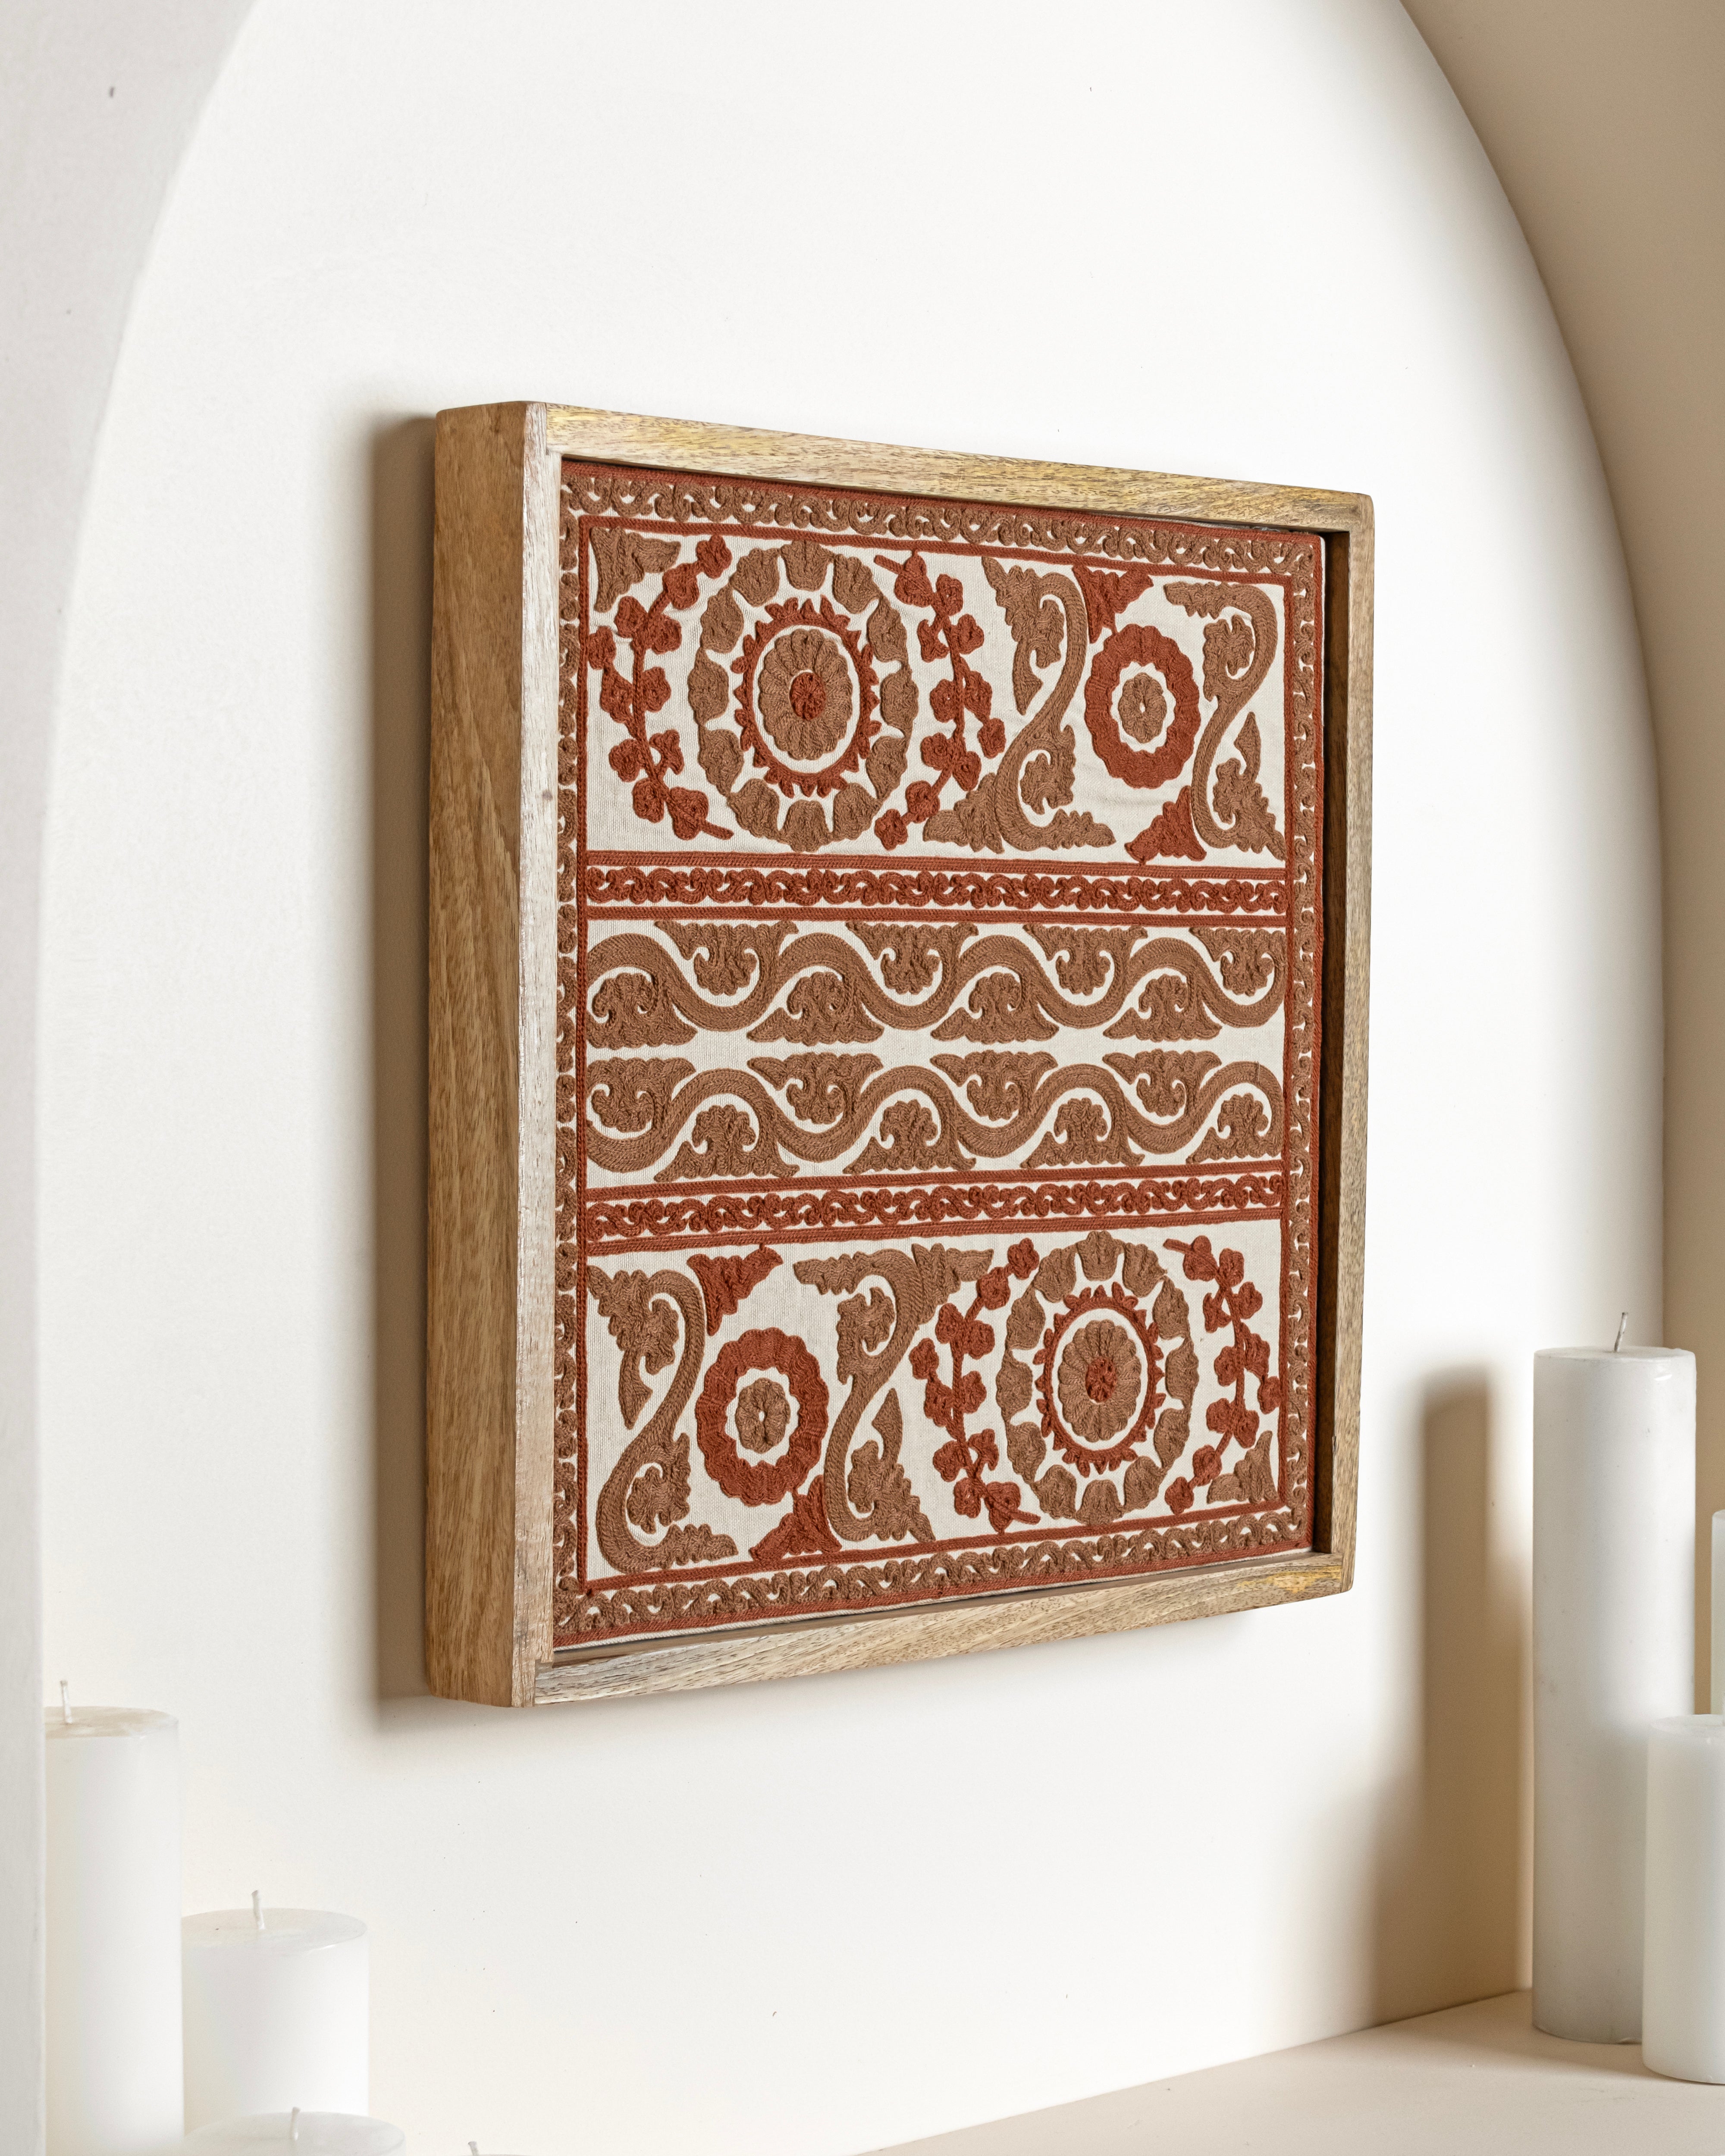 Suzani Textile | Red Framed Textile Art 16x16"